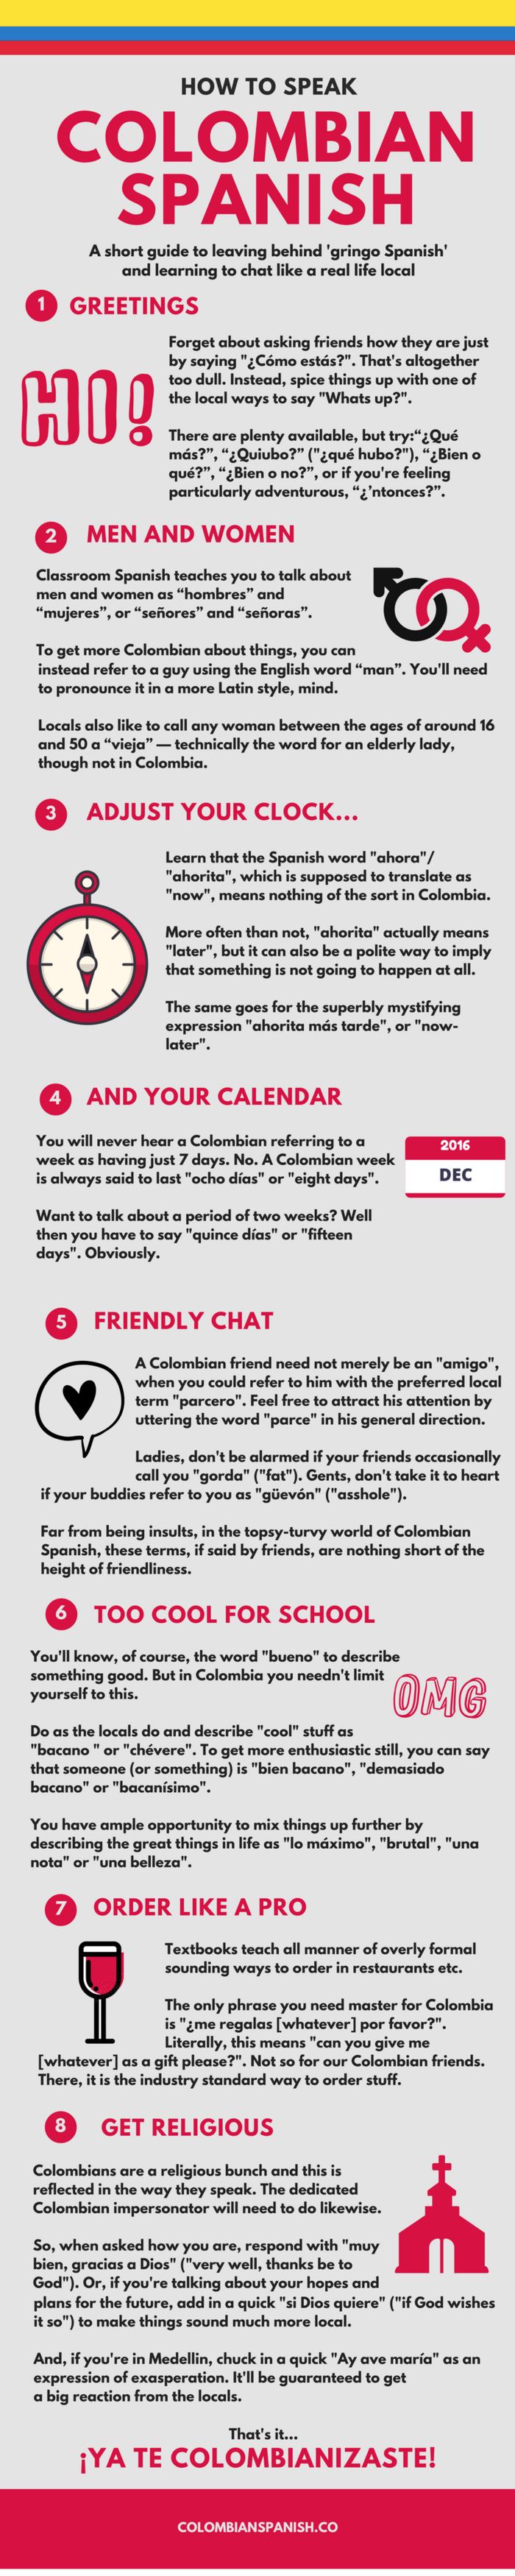 How to Speak Colombian Spanish: An Infographic | by Peter Low | Medium